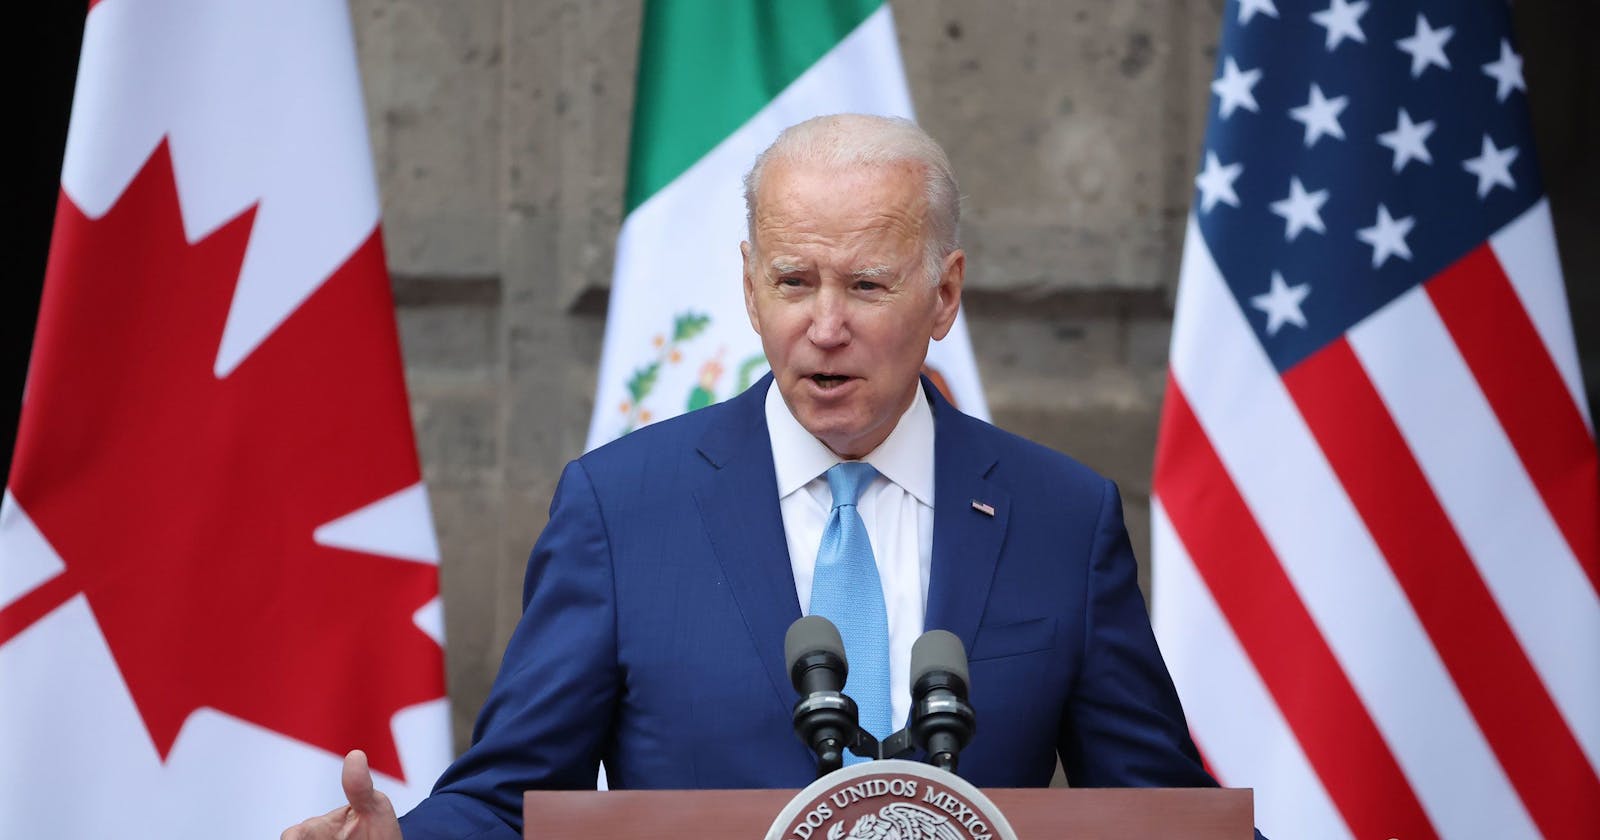 Joe Biden had a cancerous skin lesion removed last month